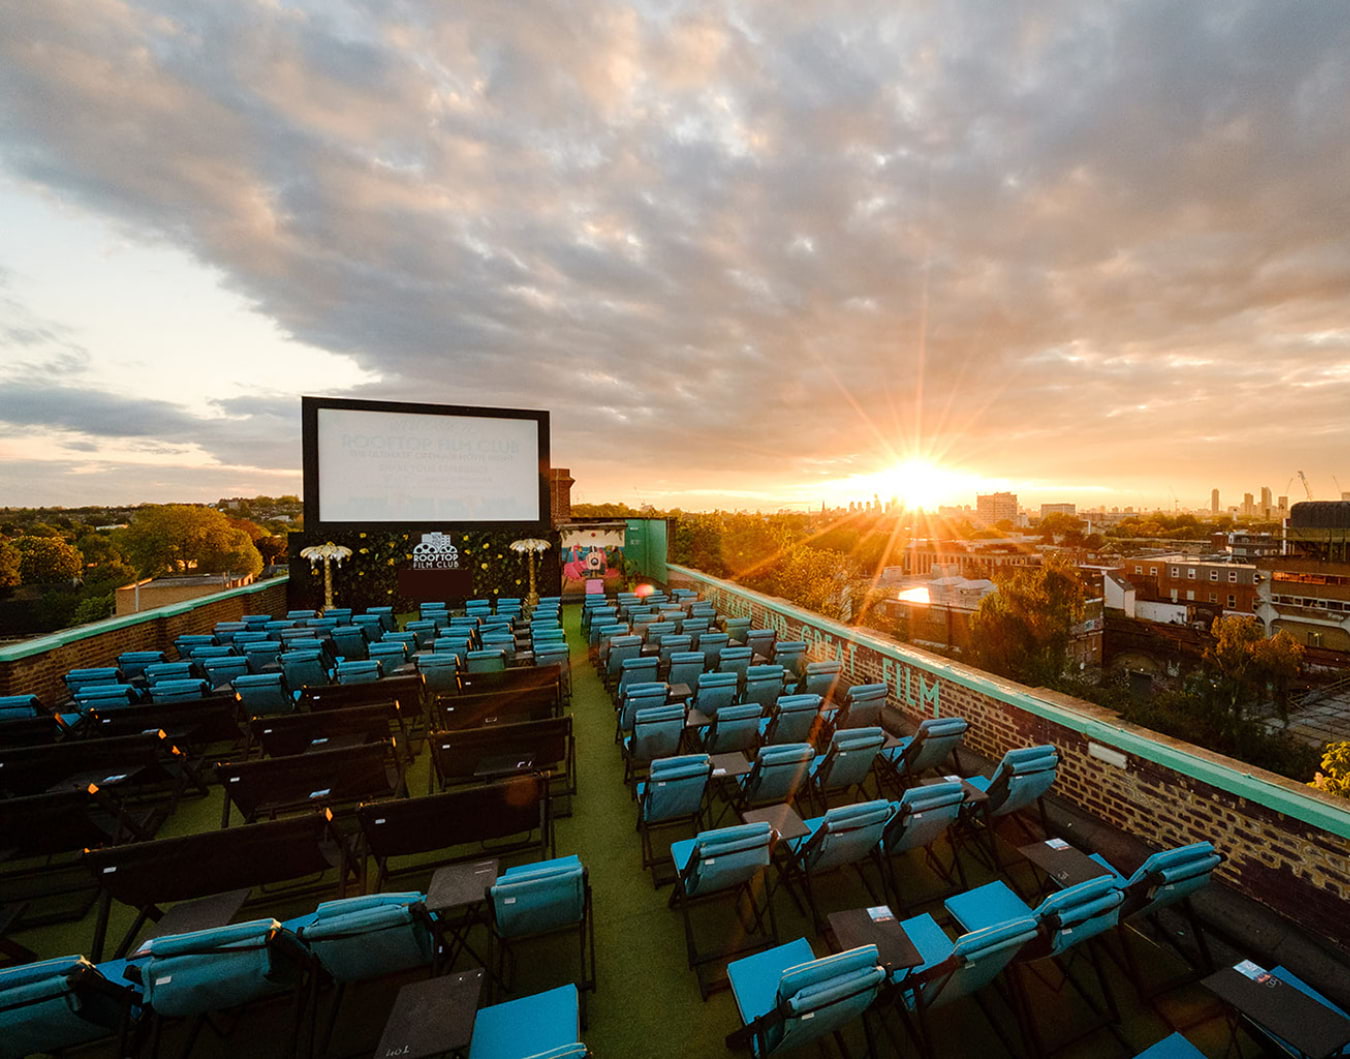 Movies with a skyline backdrop at Rooftop Film Club